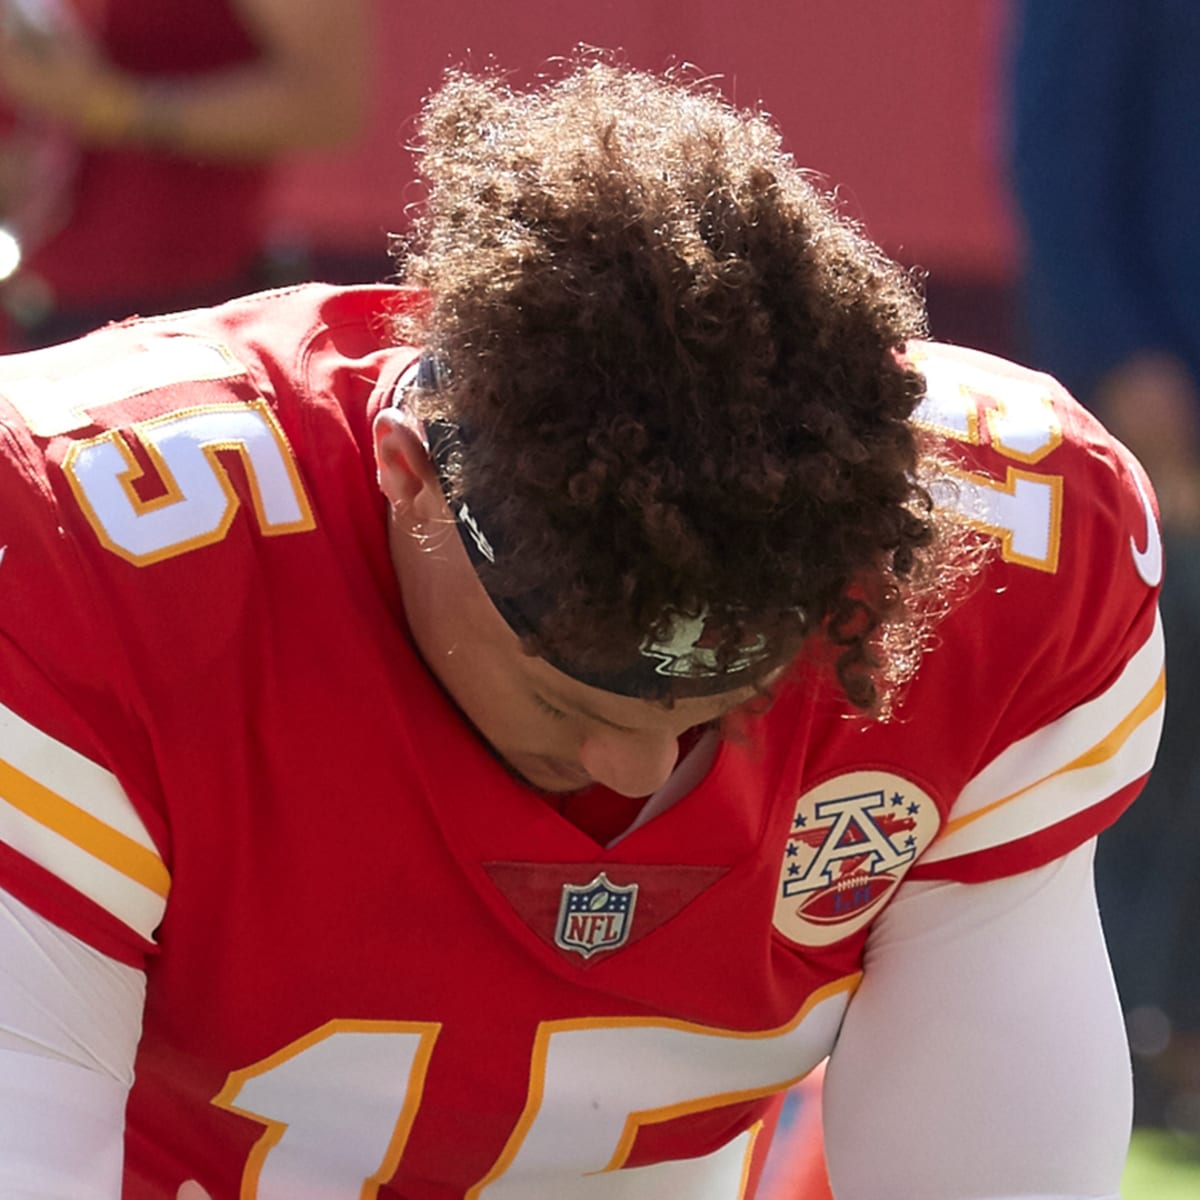 The Man Behind 'The Mahomes': Meet the QB's Barber - Sports